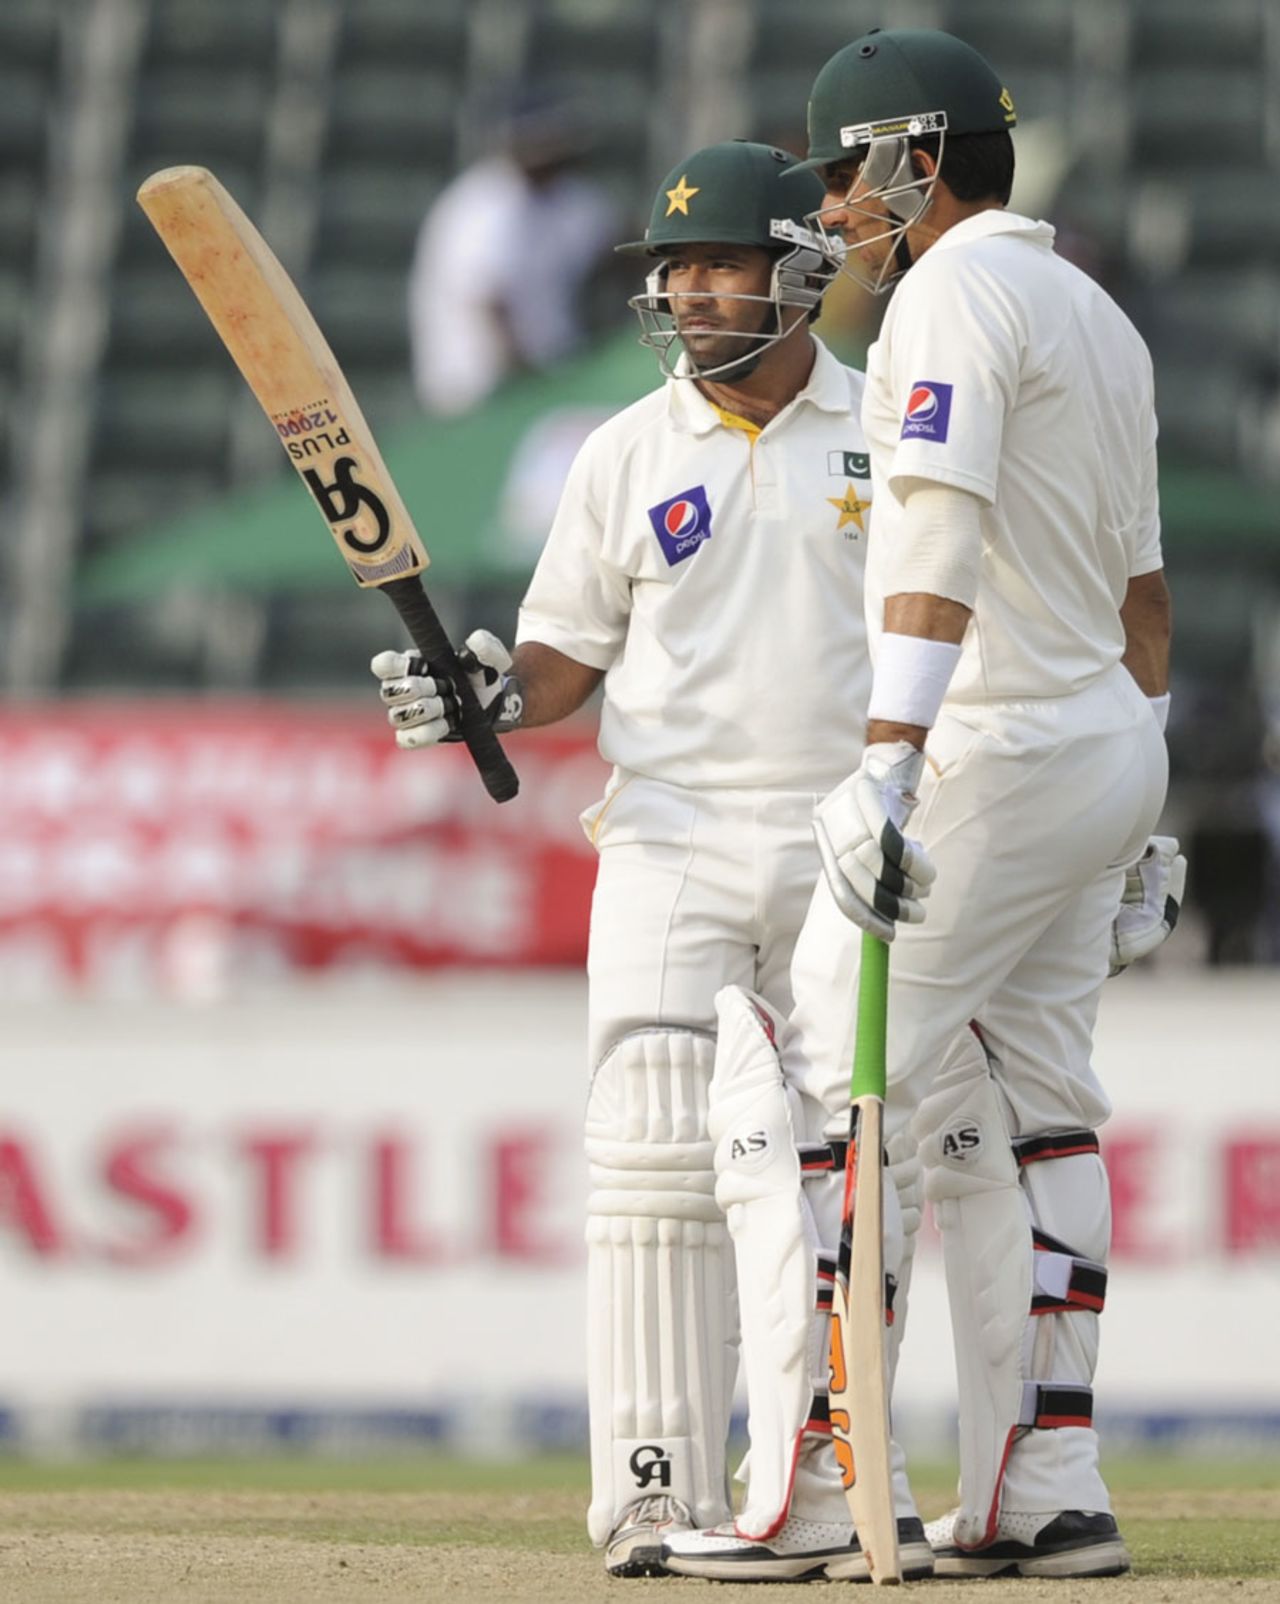 Asad Shafiq and Misbah-ul-Haq put on an unbroken century stand, South Africa v Pakistan, 1st Test, Johannesburg, 3rd day, February 3, 2013